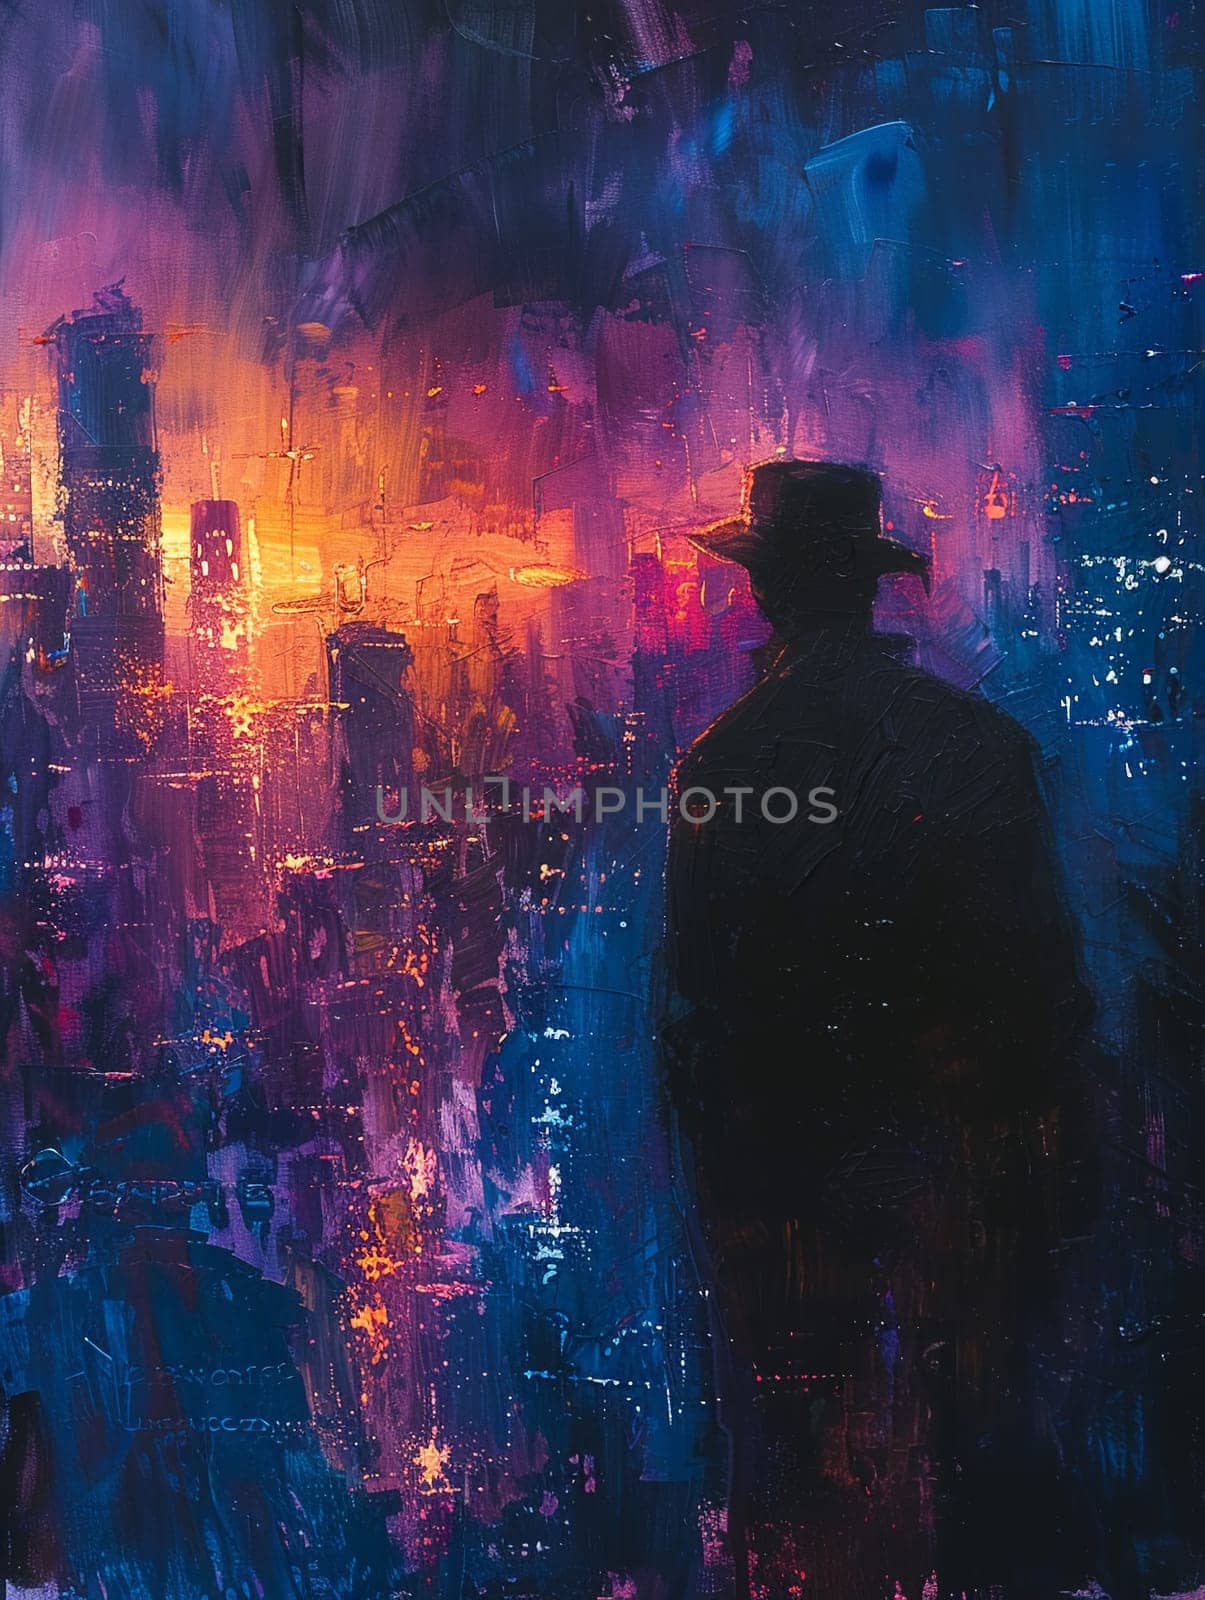 Sculptor carving the essence of the aether, their chisel a conjuring of form and void. City skyline at dusk painted in broad, impressionistic strokes of deep blues and purples.